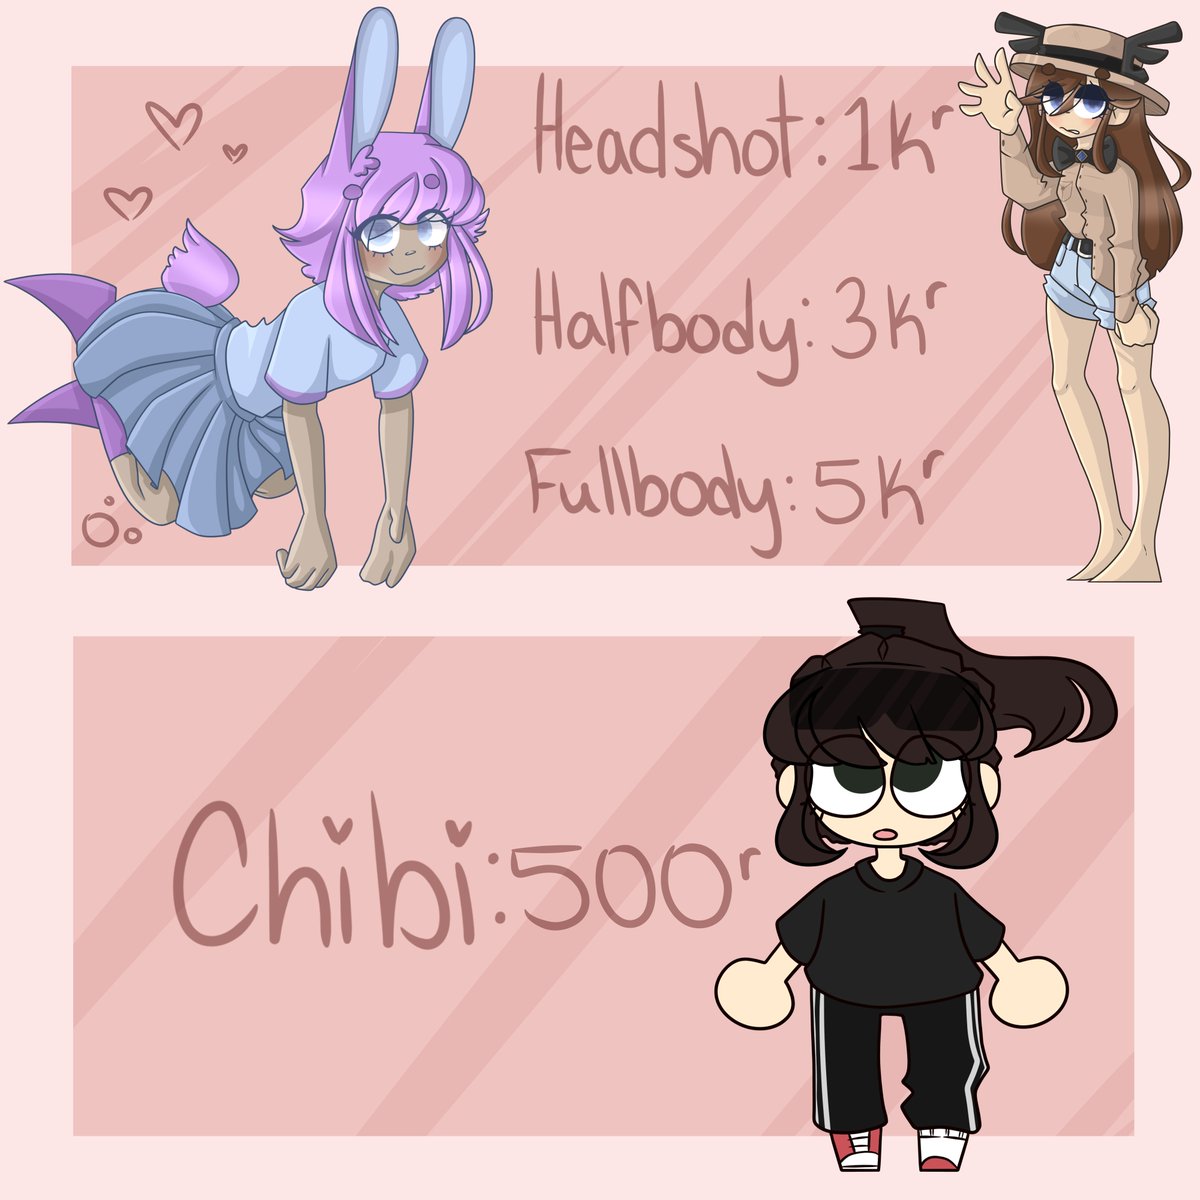 Duover Robux Giveaway Pinned On Twitter These Prices Are A Lot - robux lolco